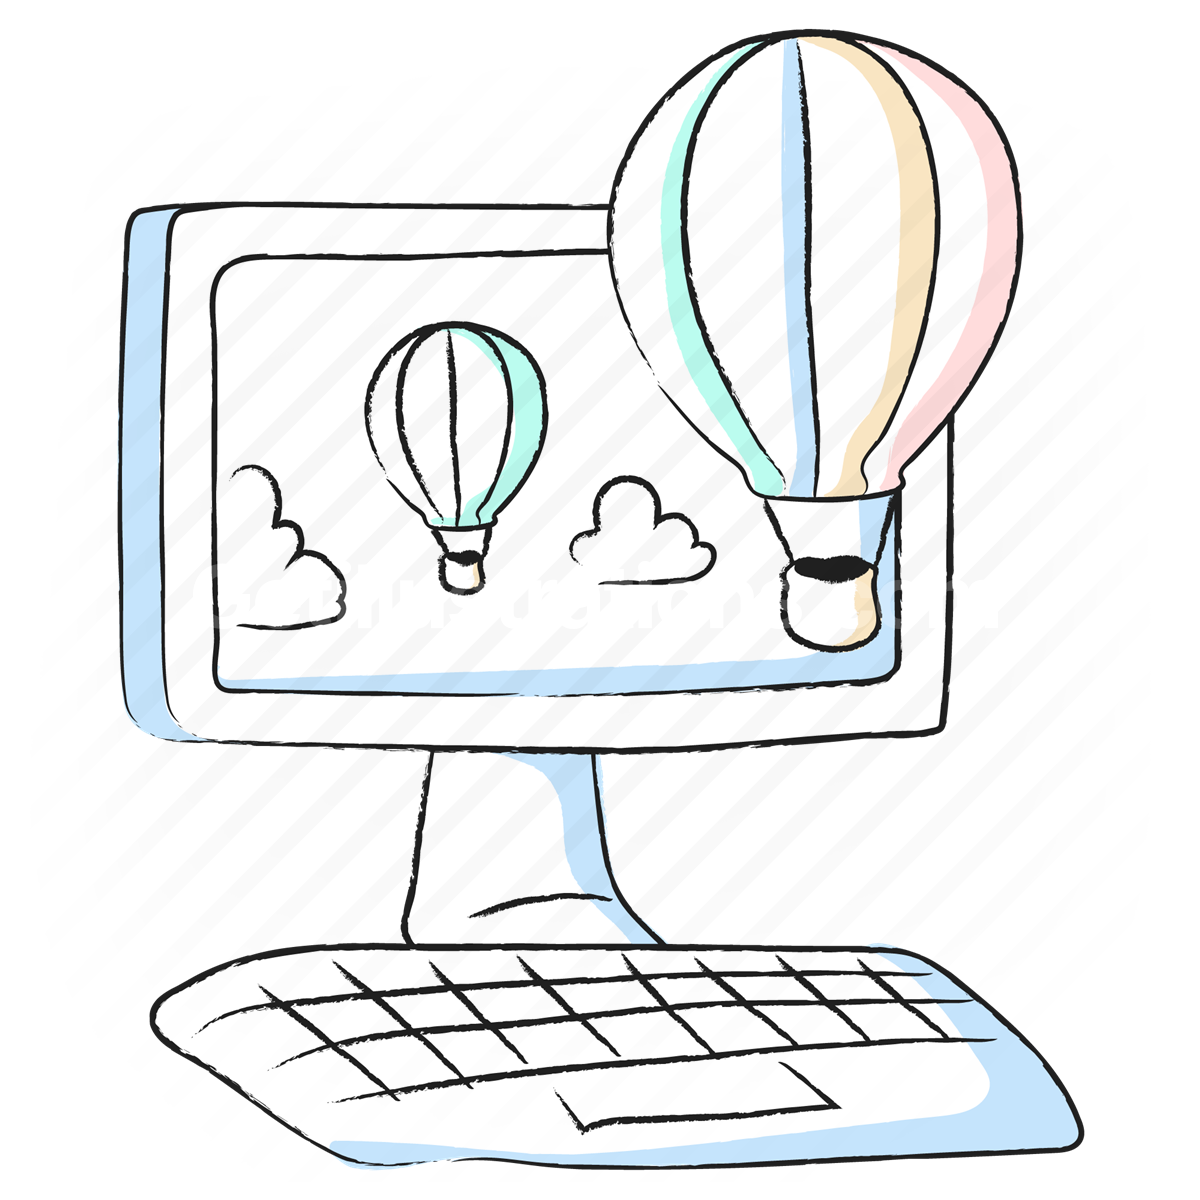 computer, device, monitor, screen, hot air balloon, travelling, lift off